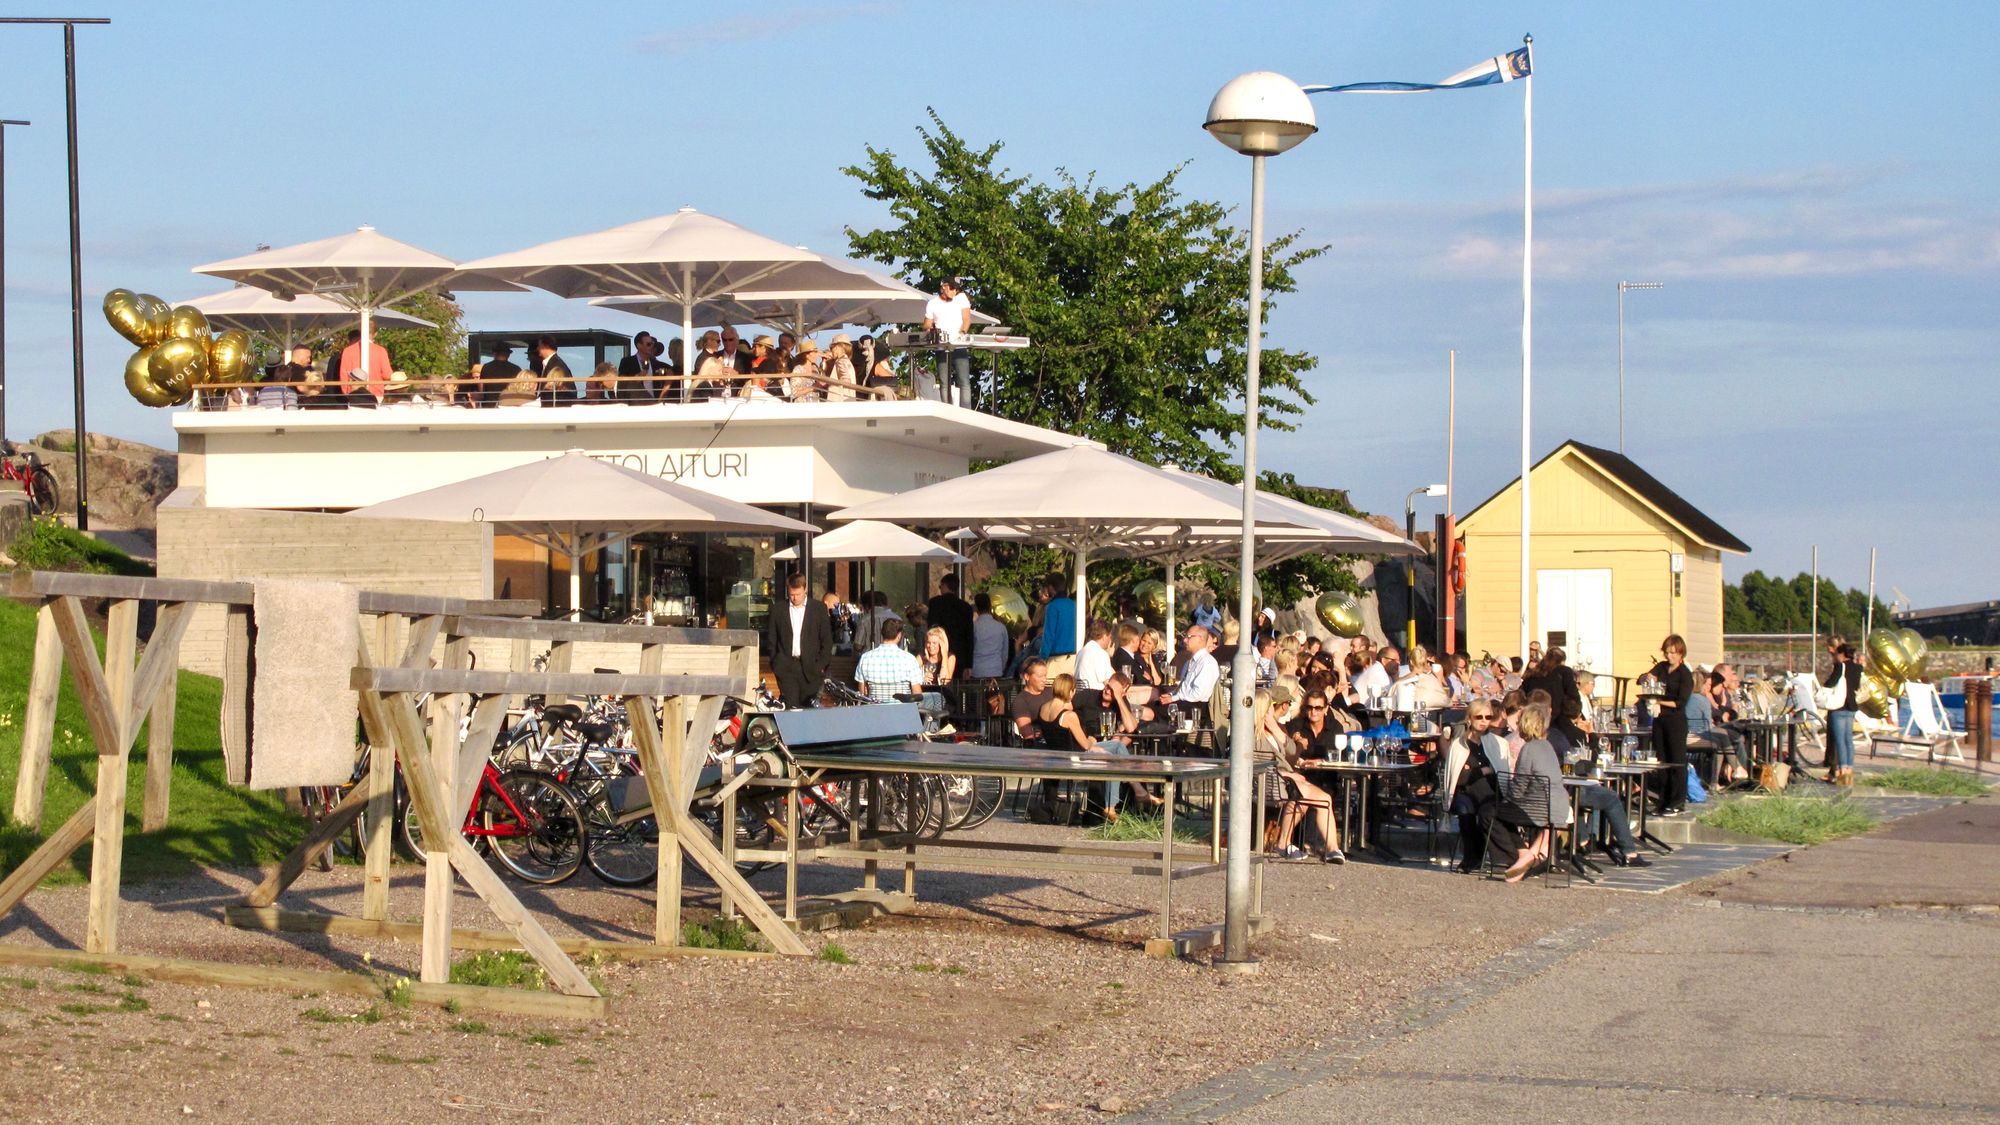 Pop-up Restaurants on the Waterfront: Six Cities that Do it Well